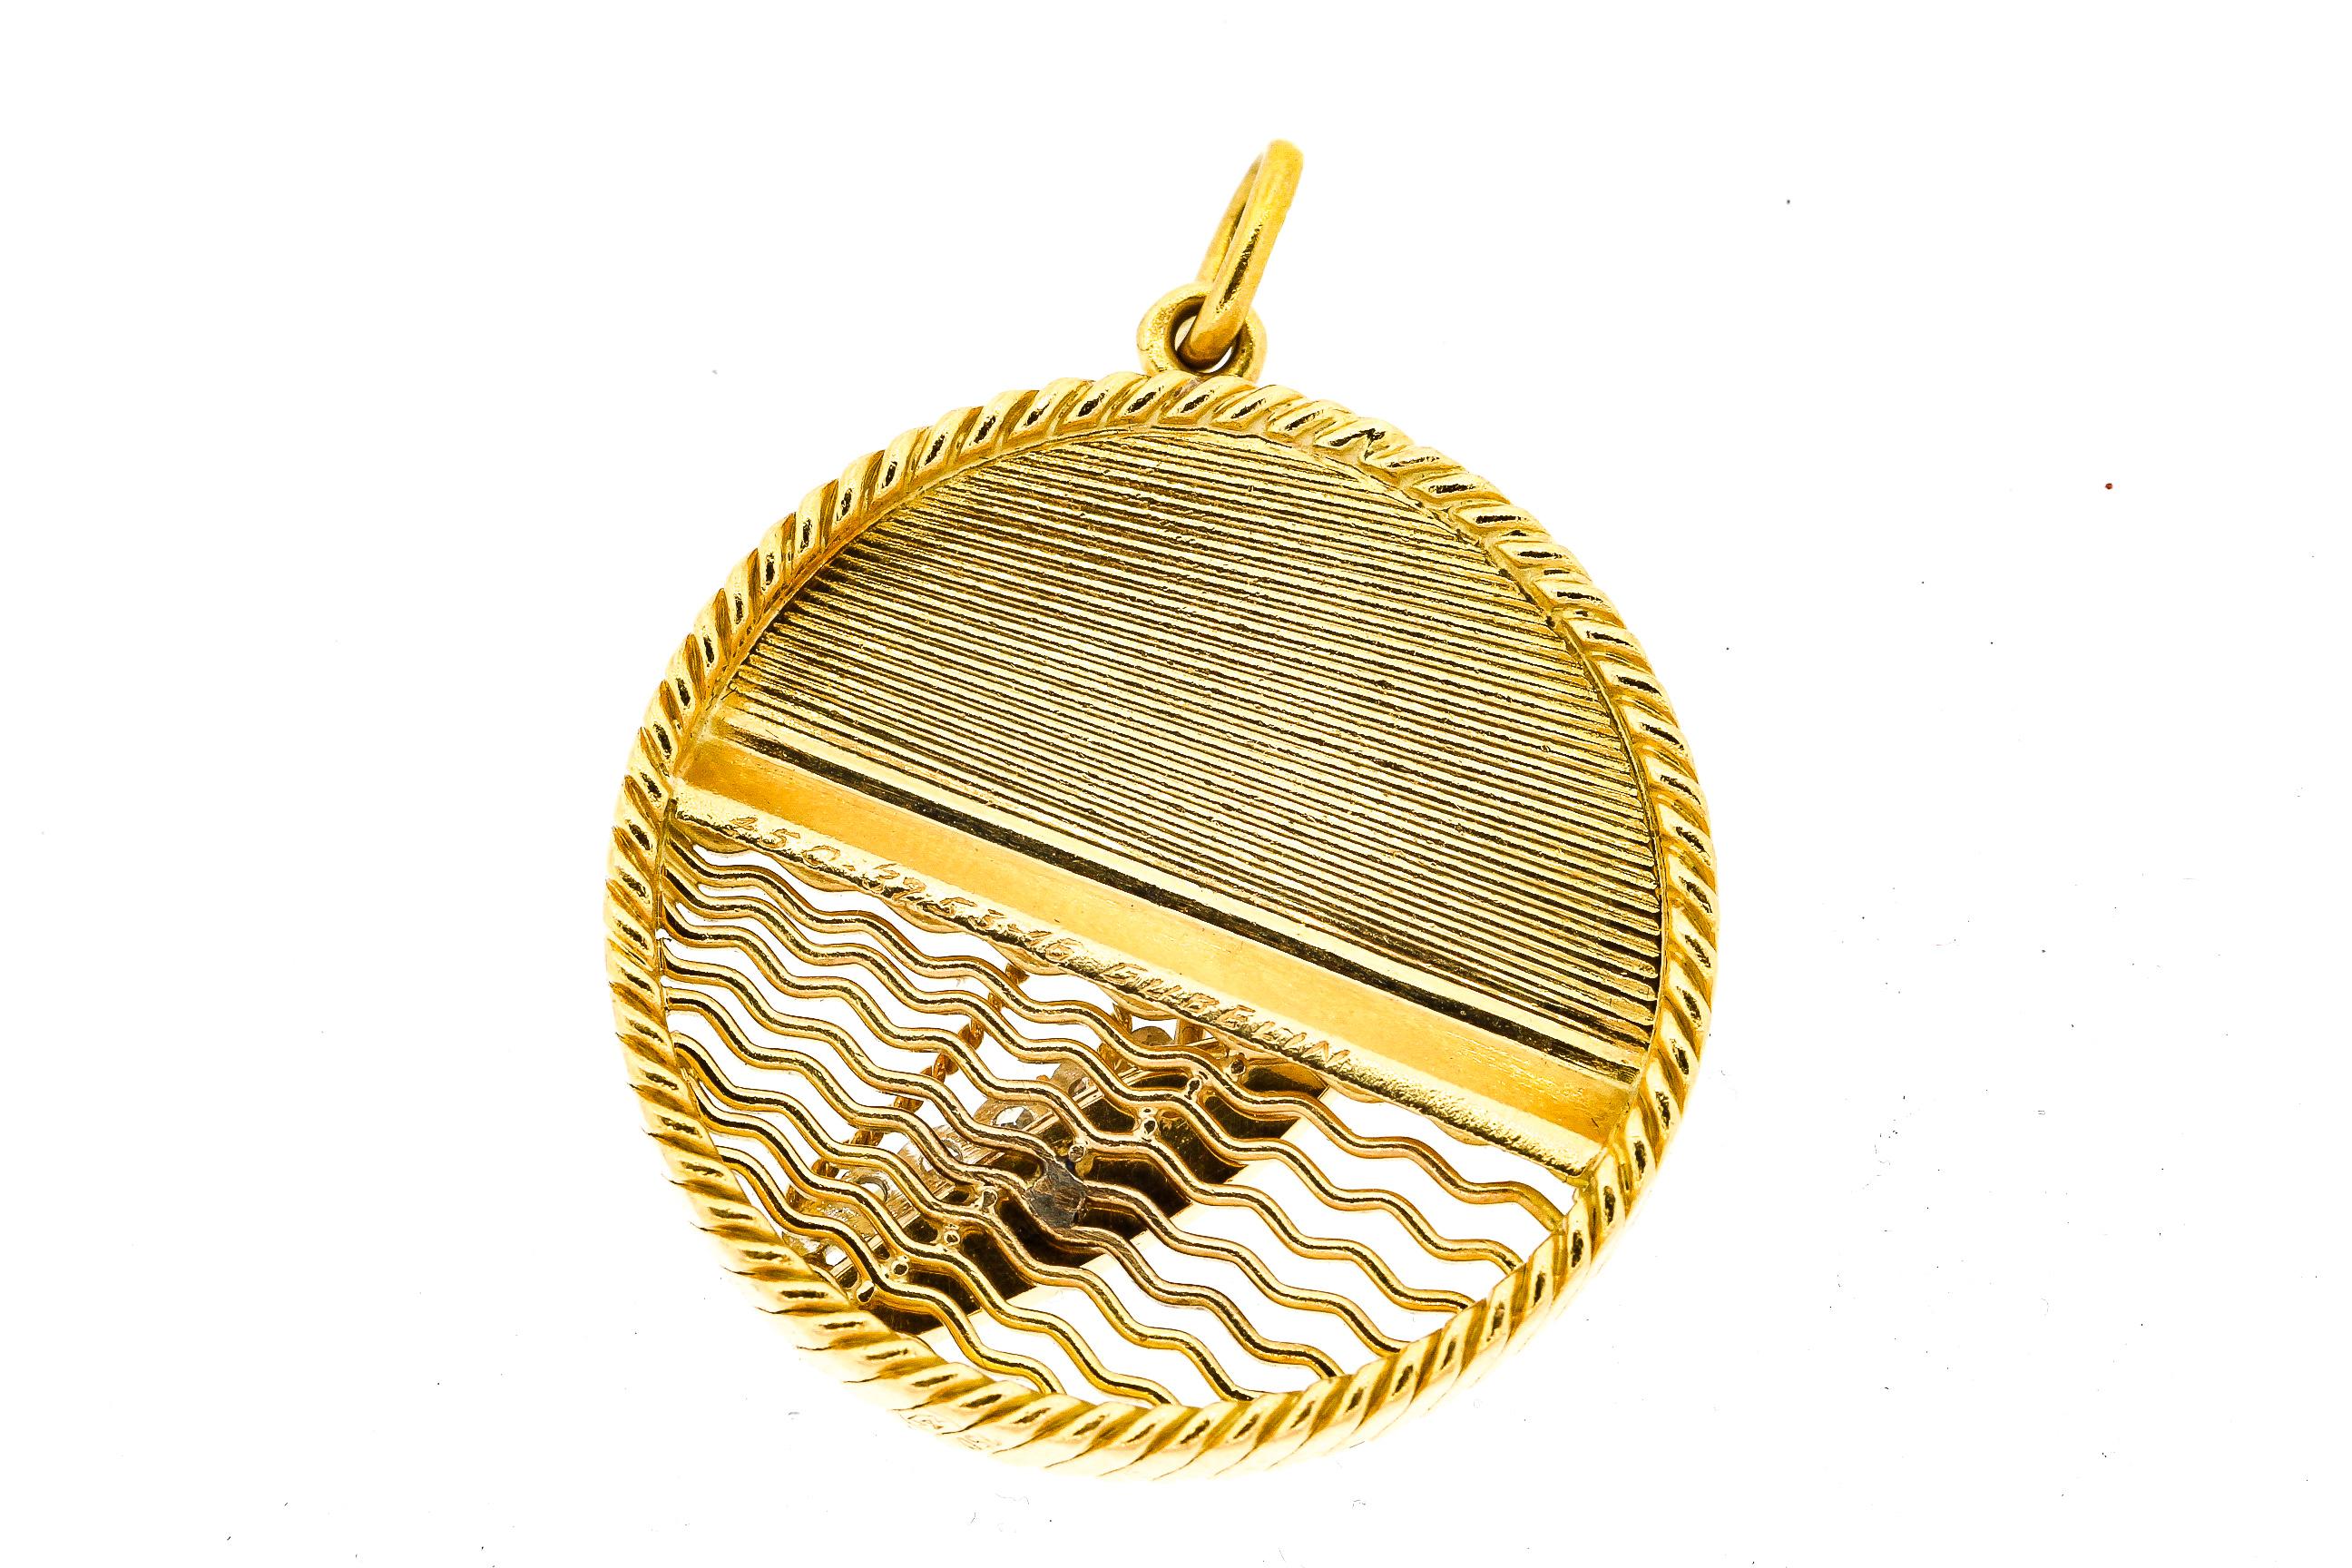 A wonderfully made 18k yellow gold charm depicting a sailboat docked near palm trees signed Gubelin. The charm is fully marked with French hallmarks and was likely made by Georges L’Enfant who made these masterful gold charms, chains and bracelets